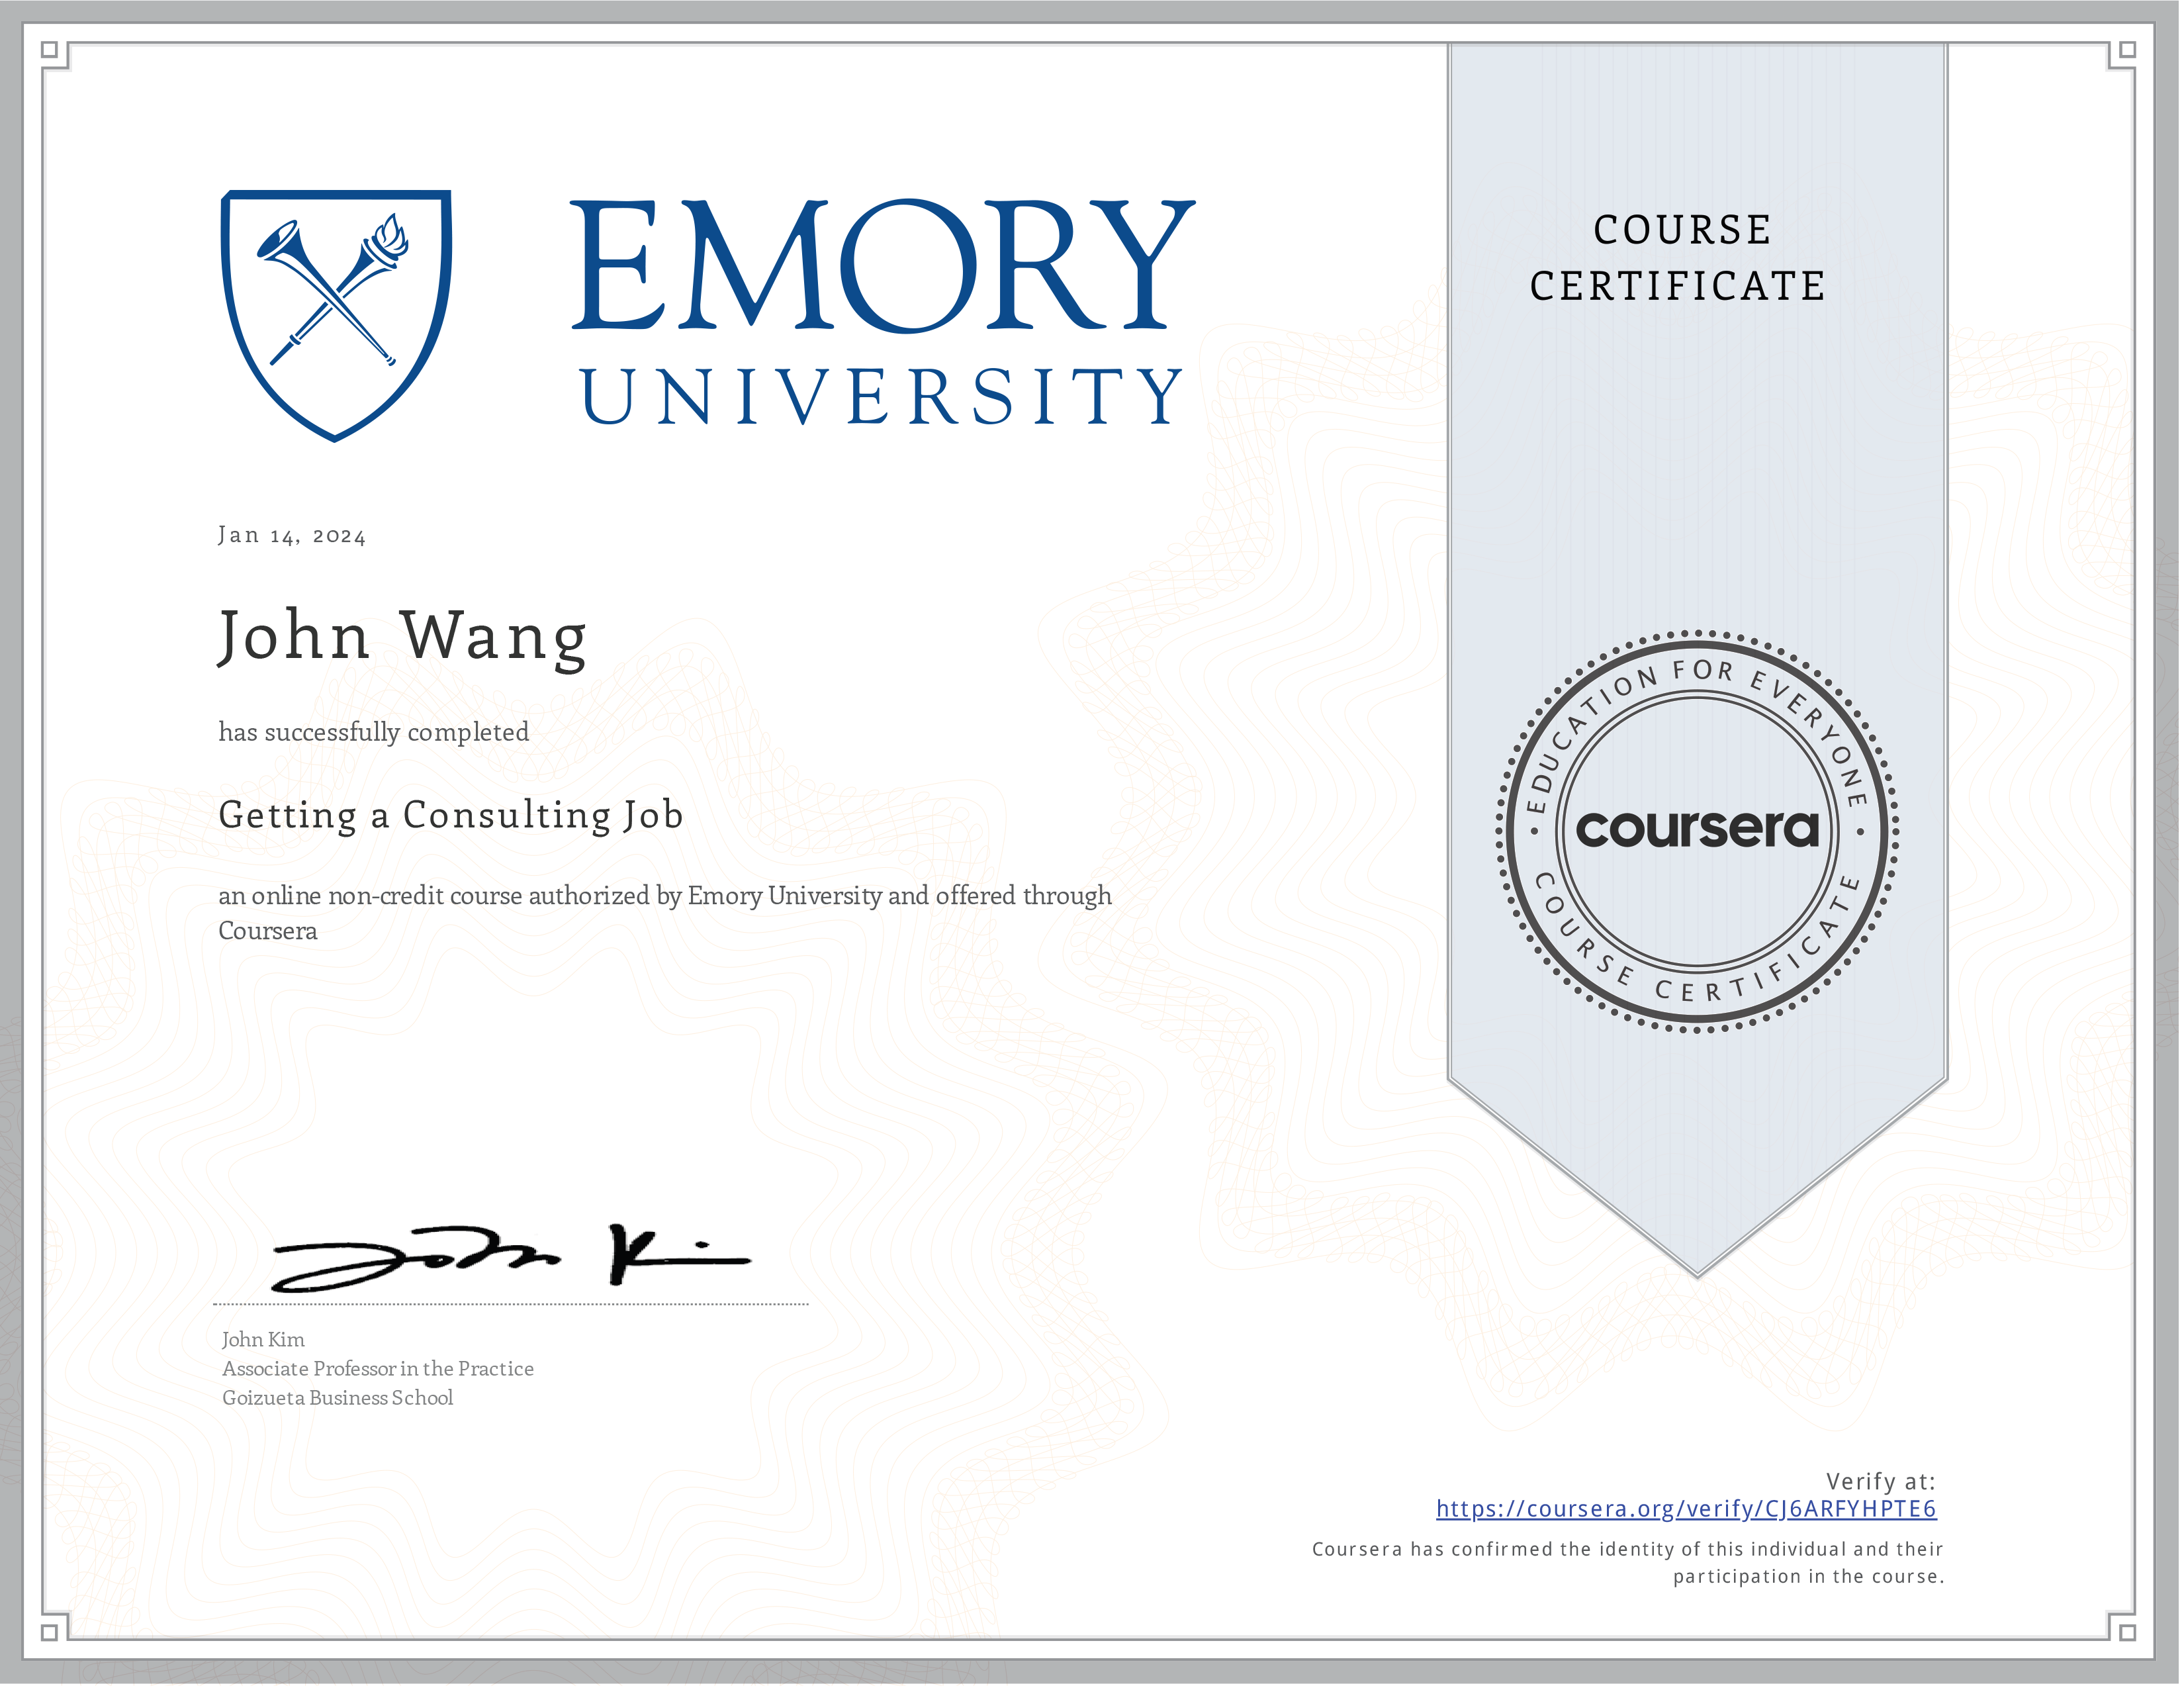 John's Getting a Consulting Job from Emory University by John Kim